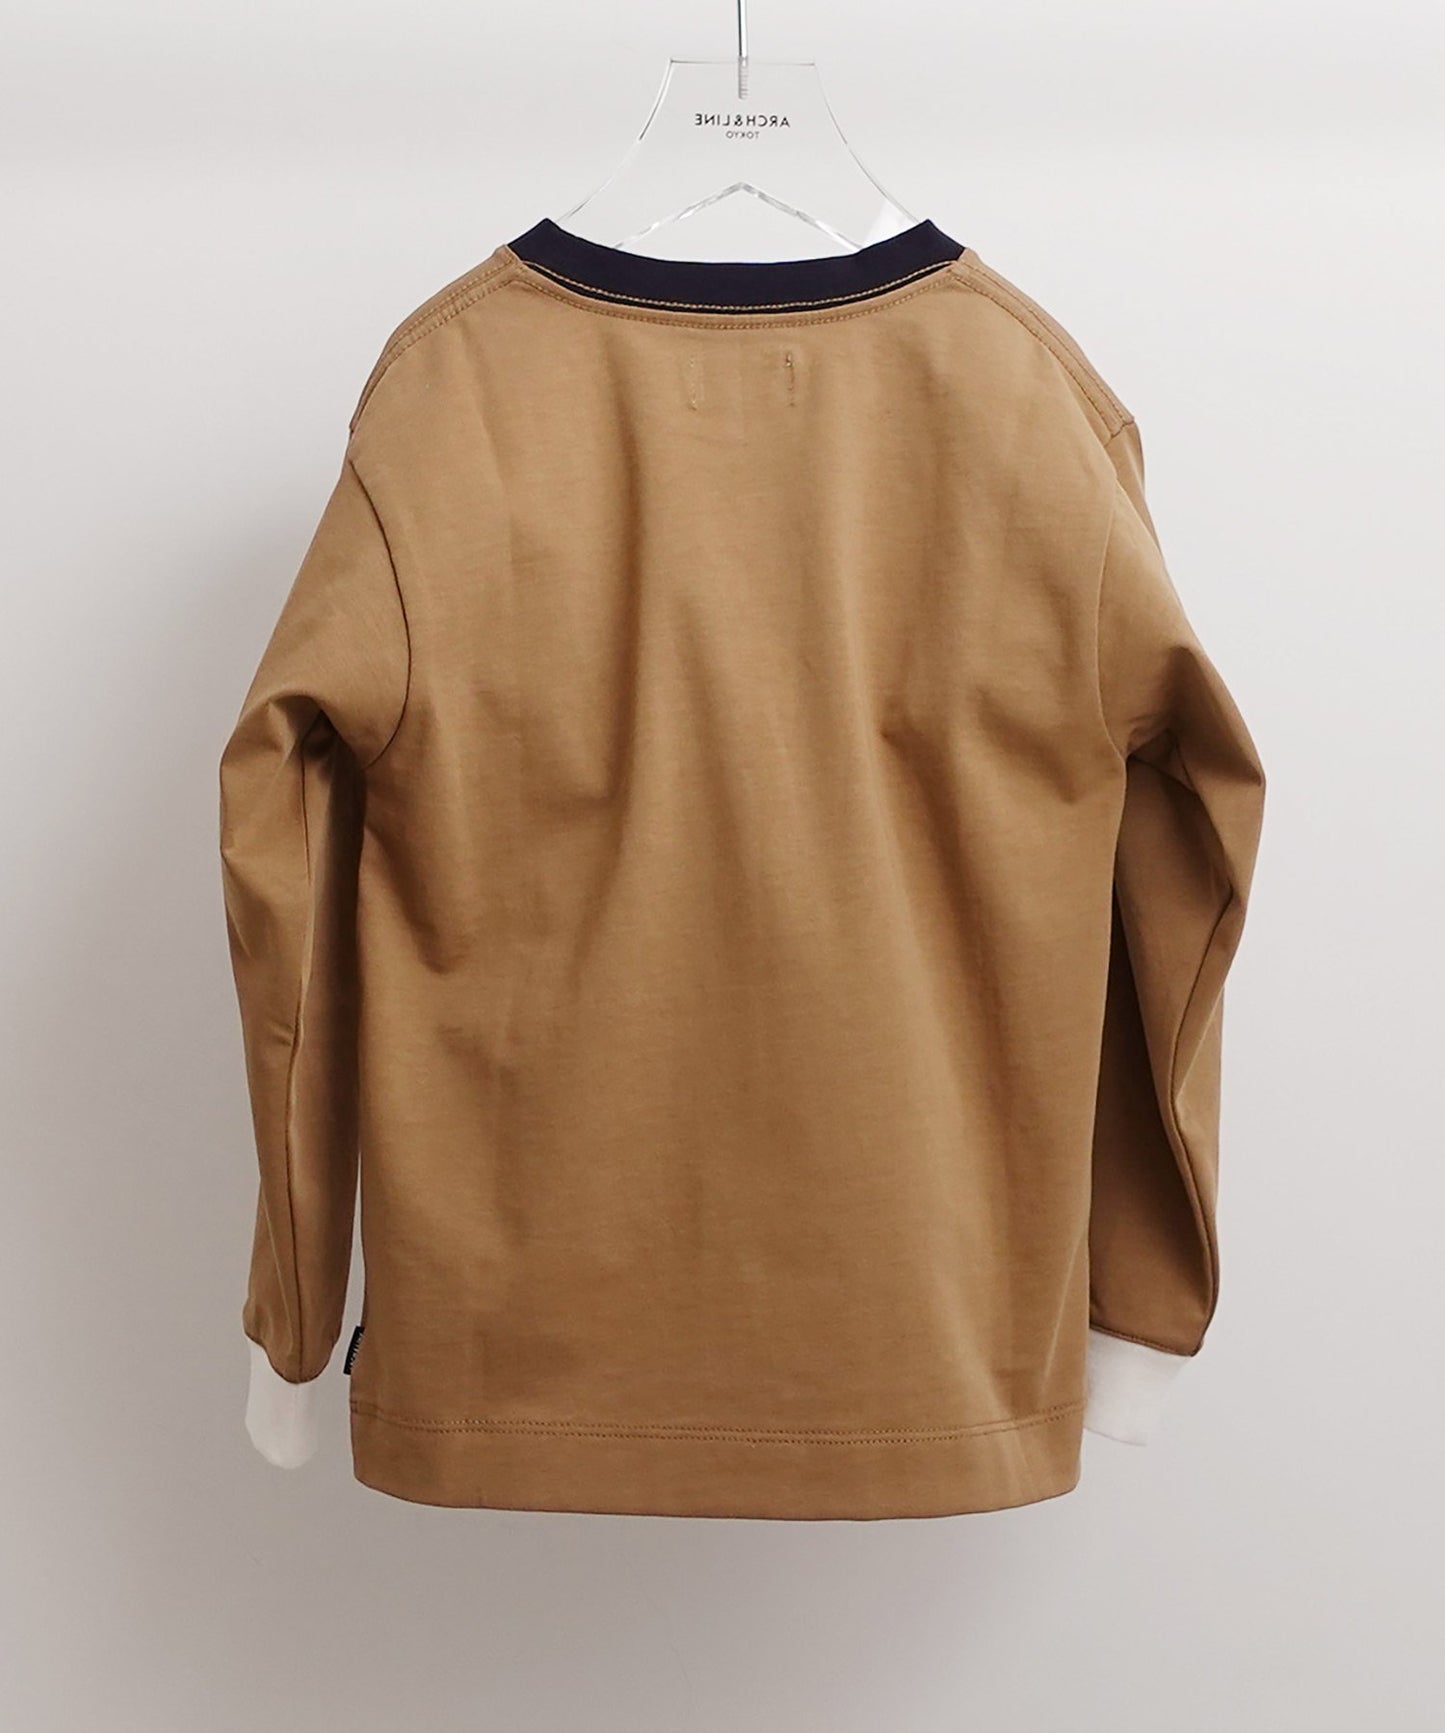 [Environmentally friendly material] OG CLEAR COTTON BIG”N” L/S TEE Organic cotton gas-fired jersey [100-145cm]